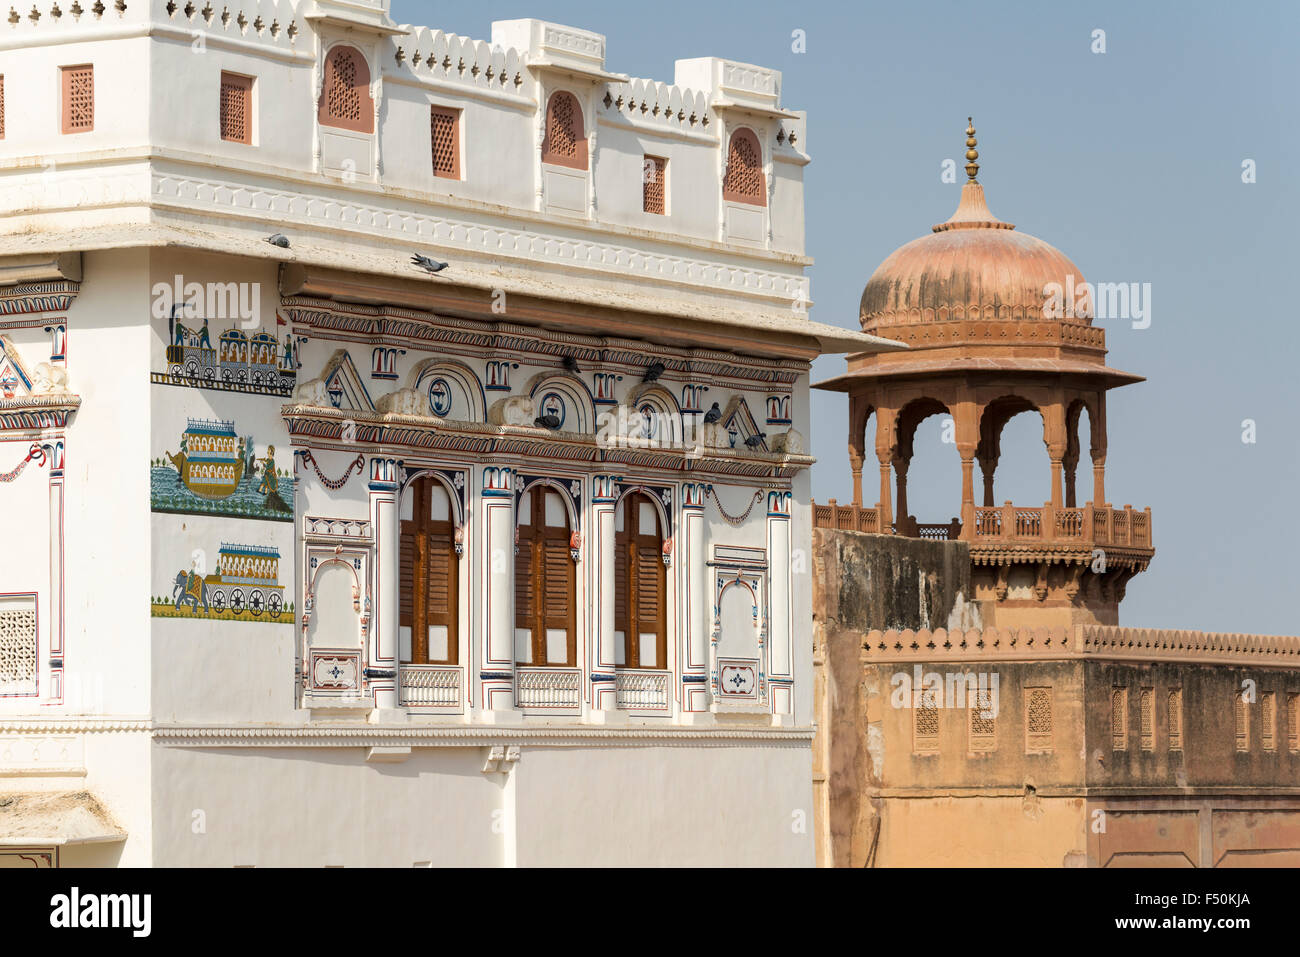 Detail of Junagarh Fort, originally called Chintamani. It was built in 16th century and is one of the main tourist attractions t Stock Photo